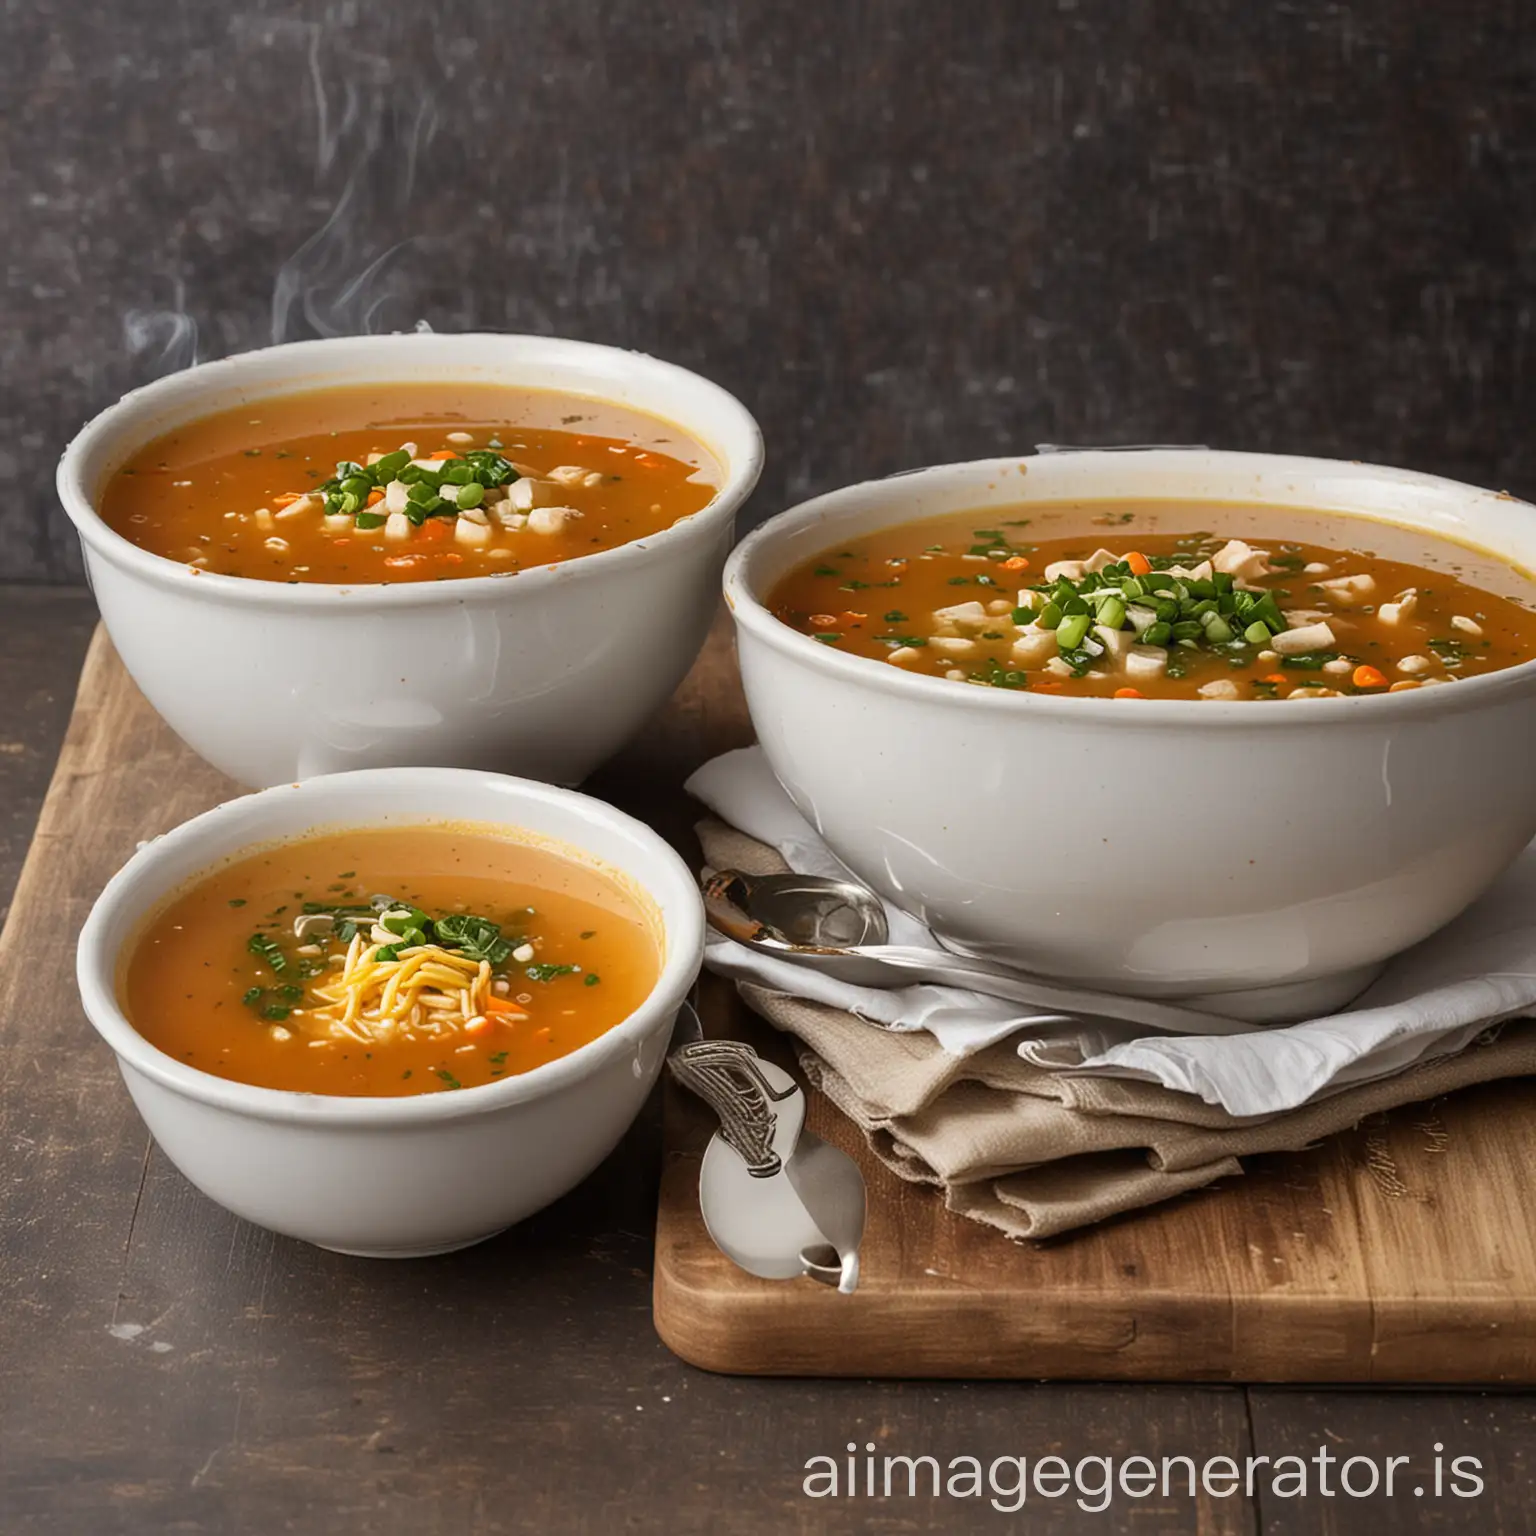 Three-Bowls-of-Steaming-Soup-Large-Regular-and-Small